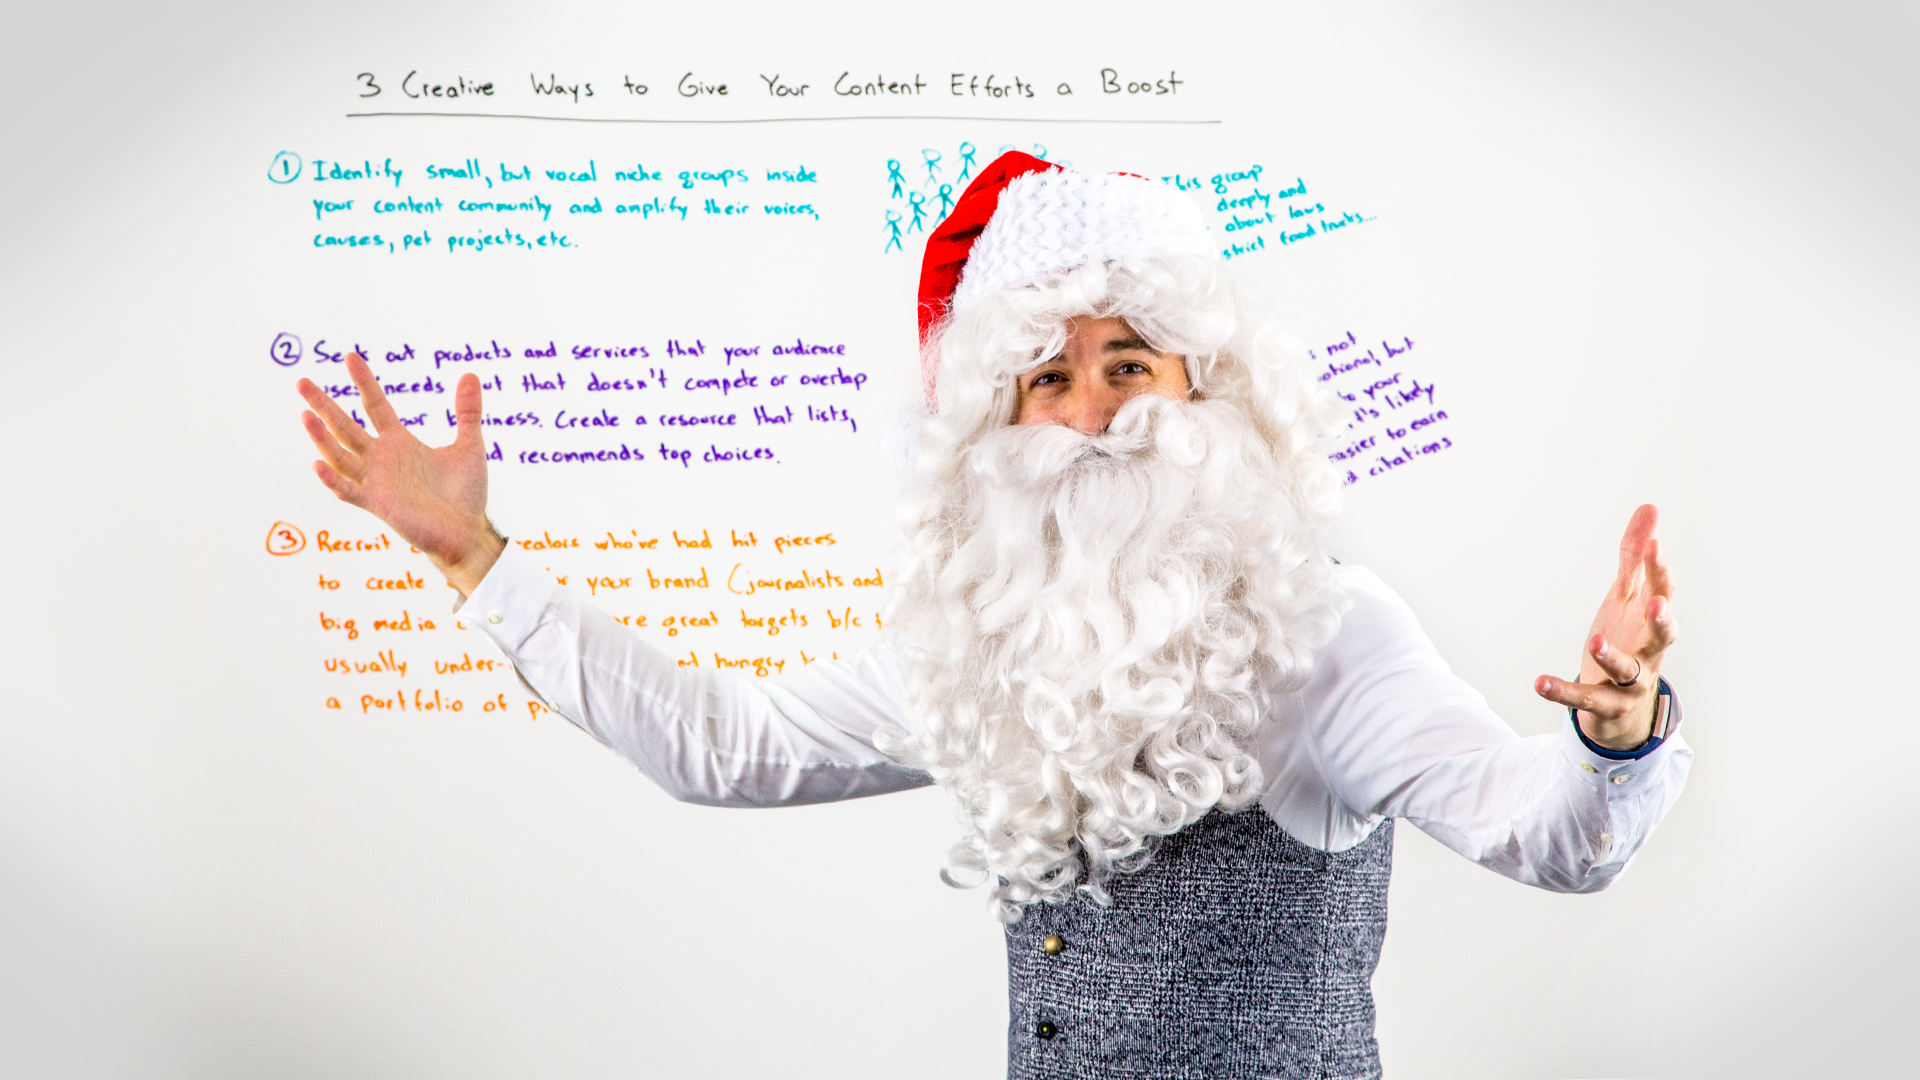 3 Creative Ways to Give Your Content Efforts a Boost — Best of Whiteboard Friday